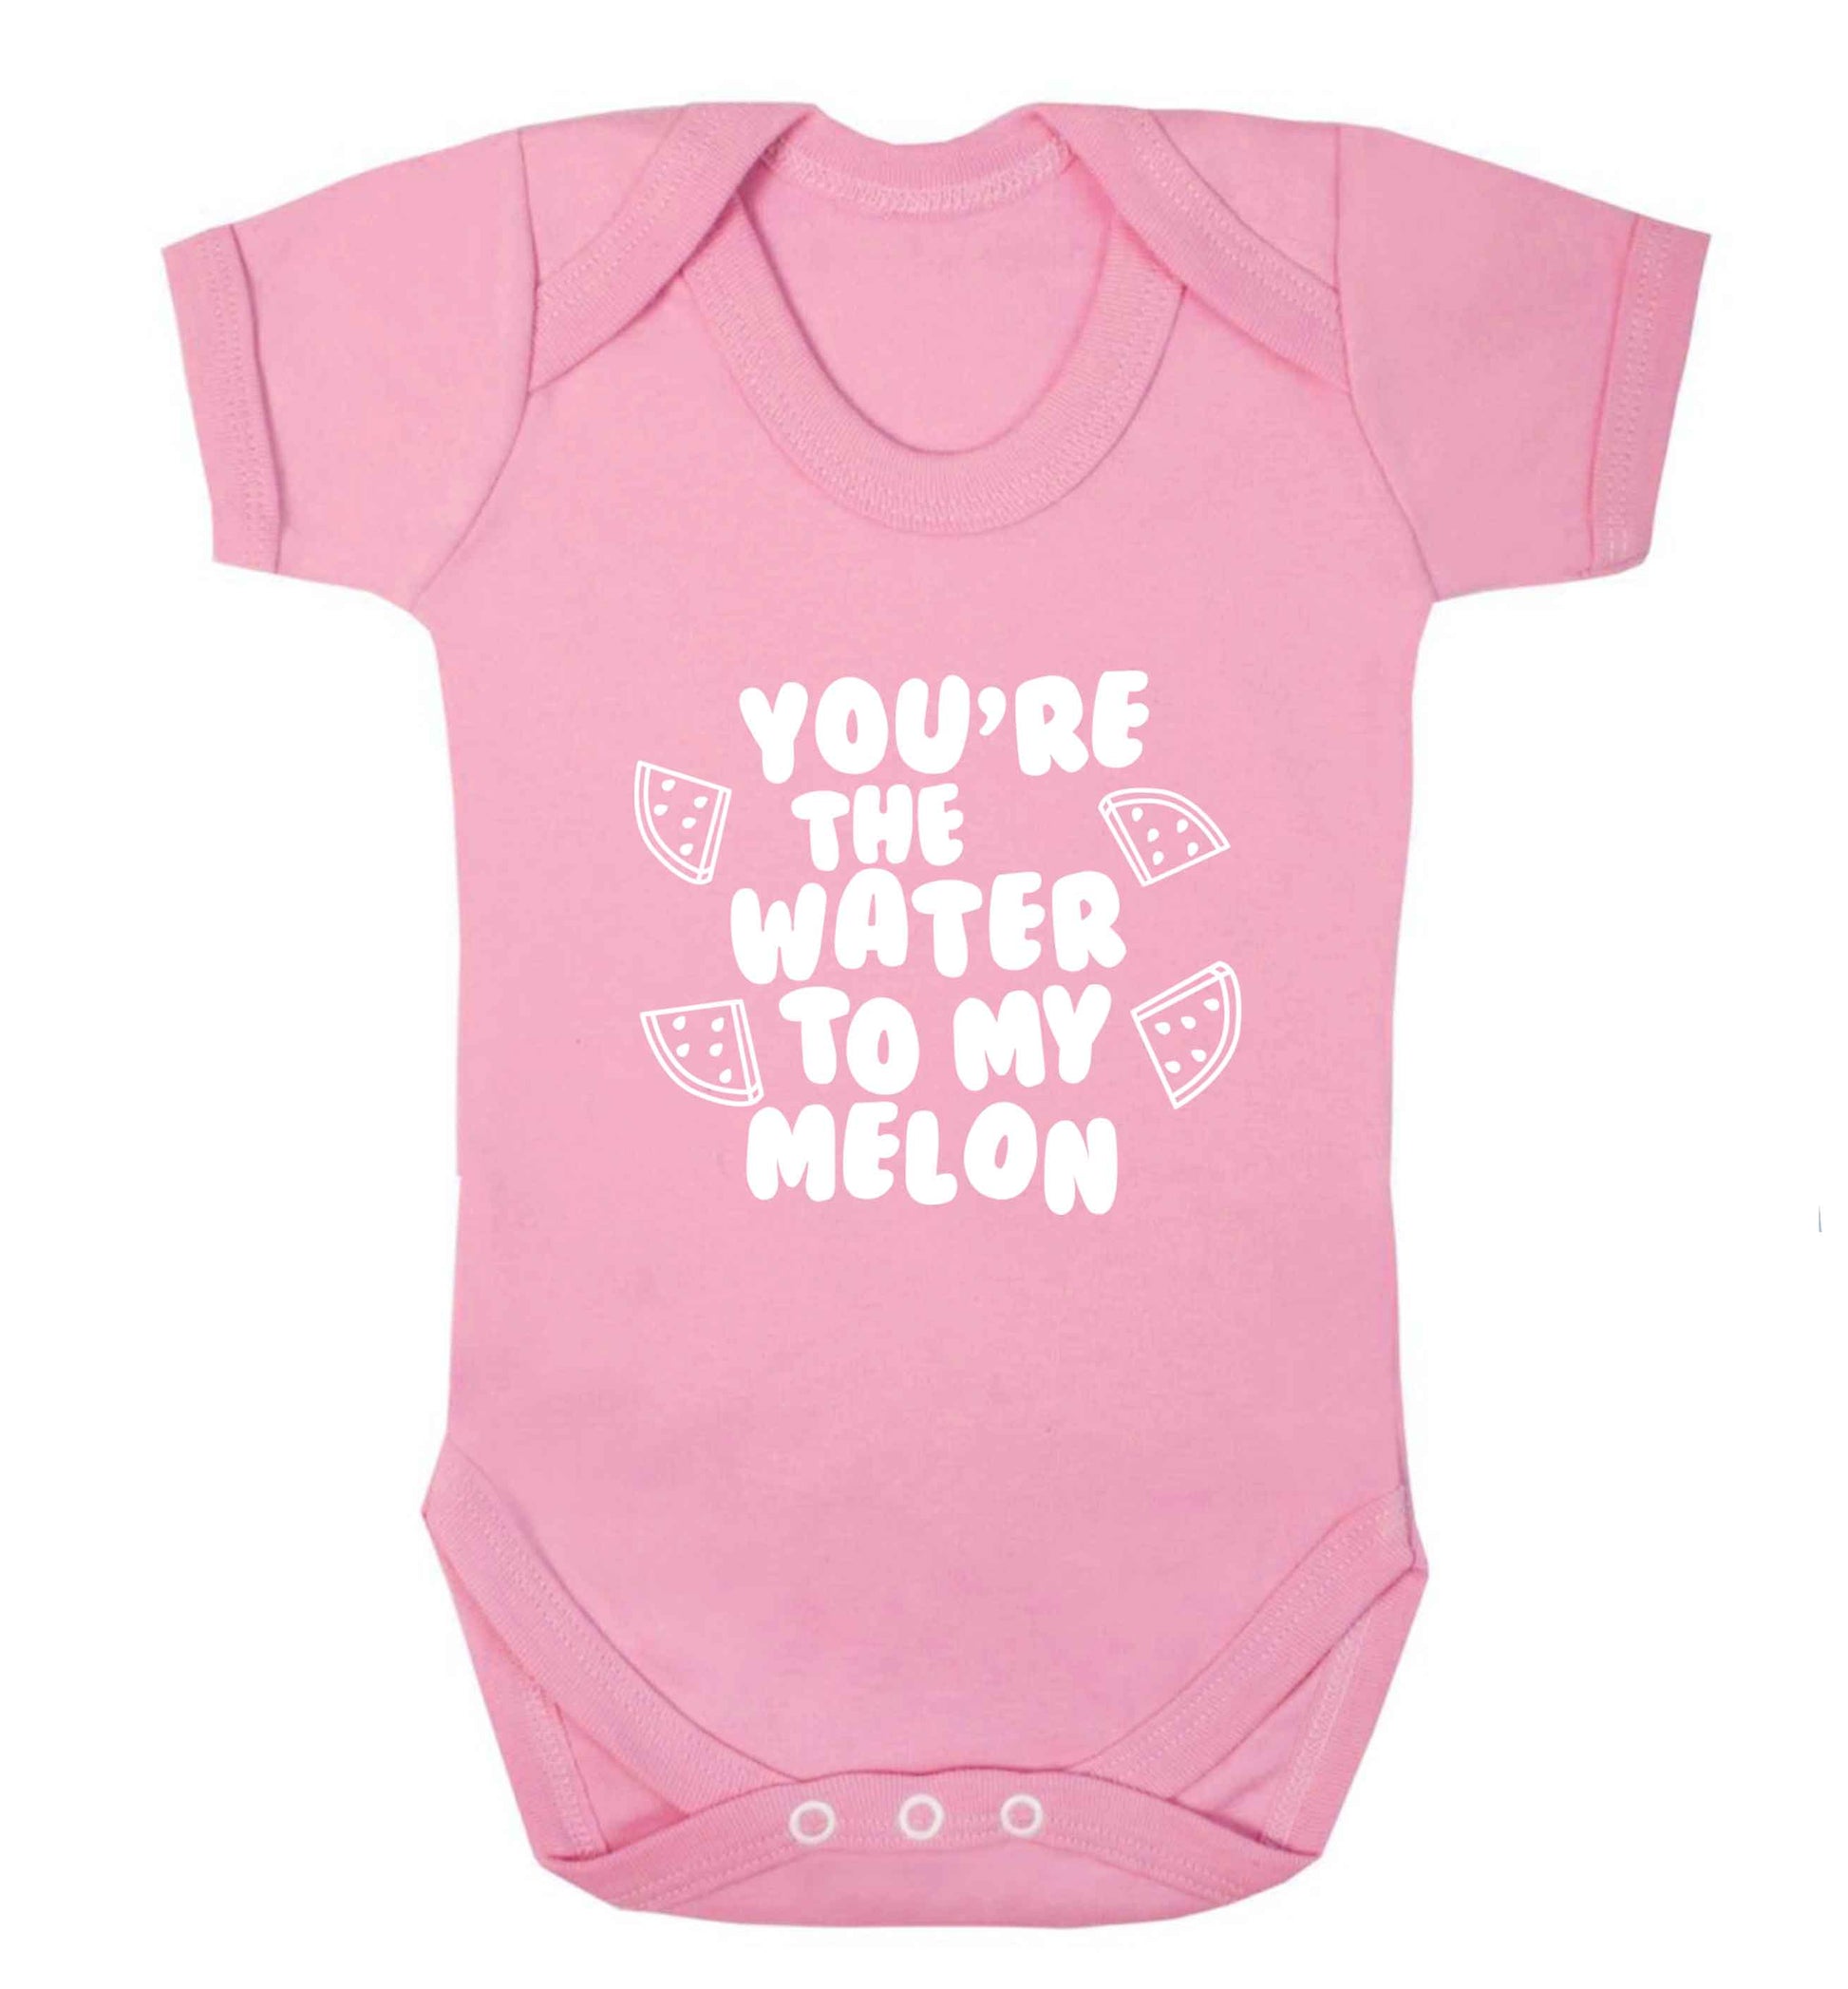 You're the water to my melon baby vest pale pink 18-24 months